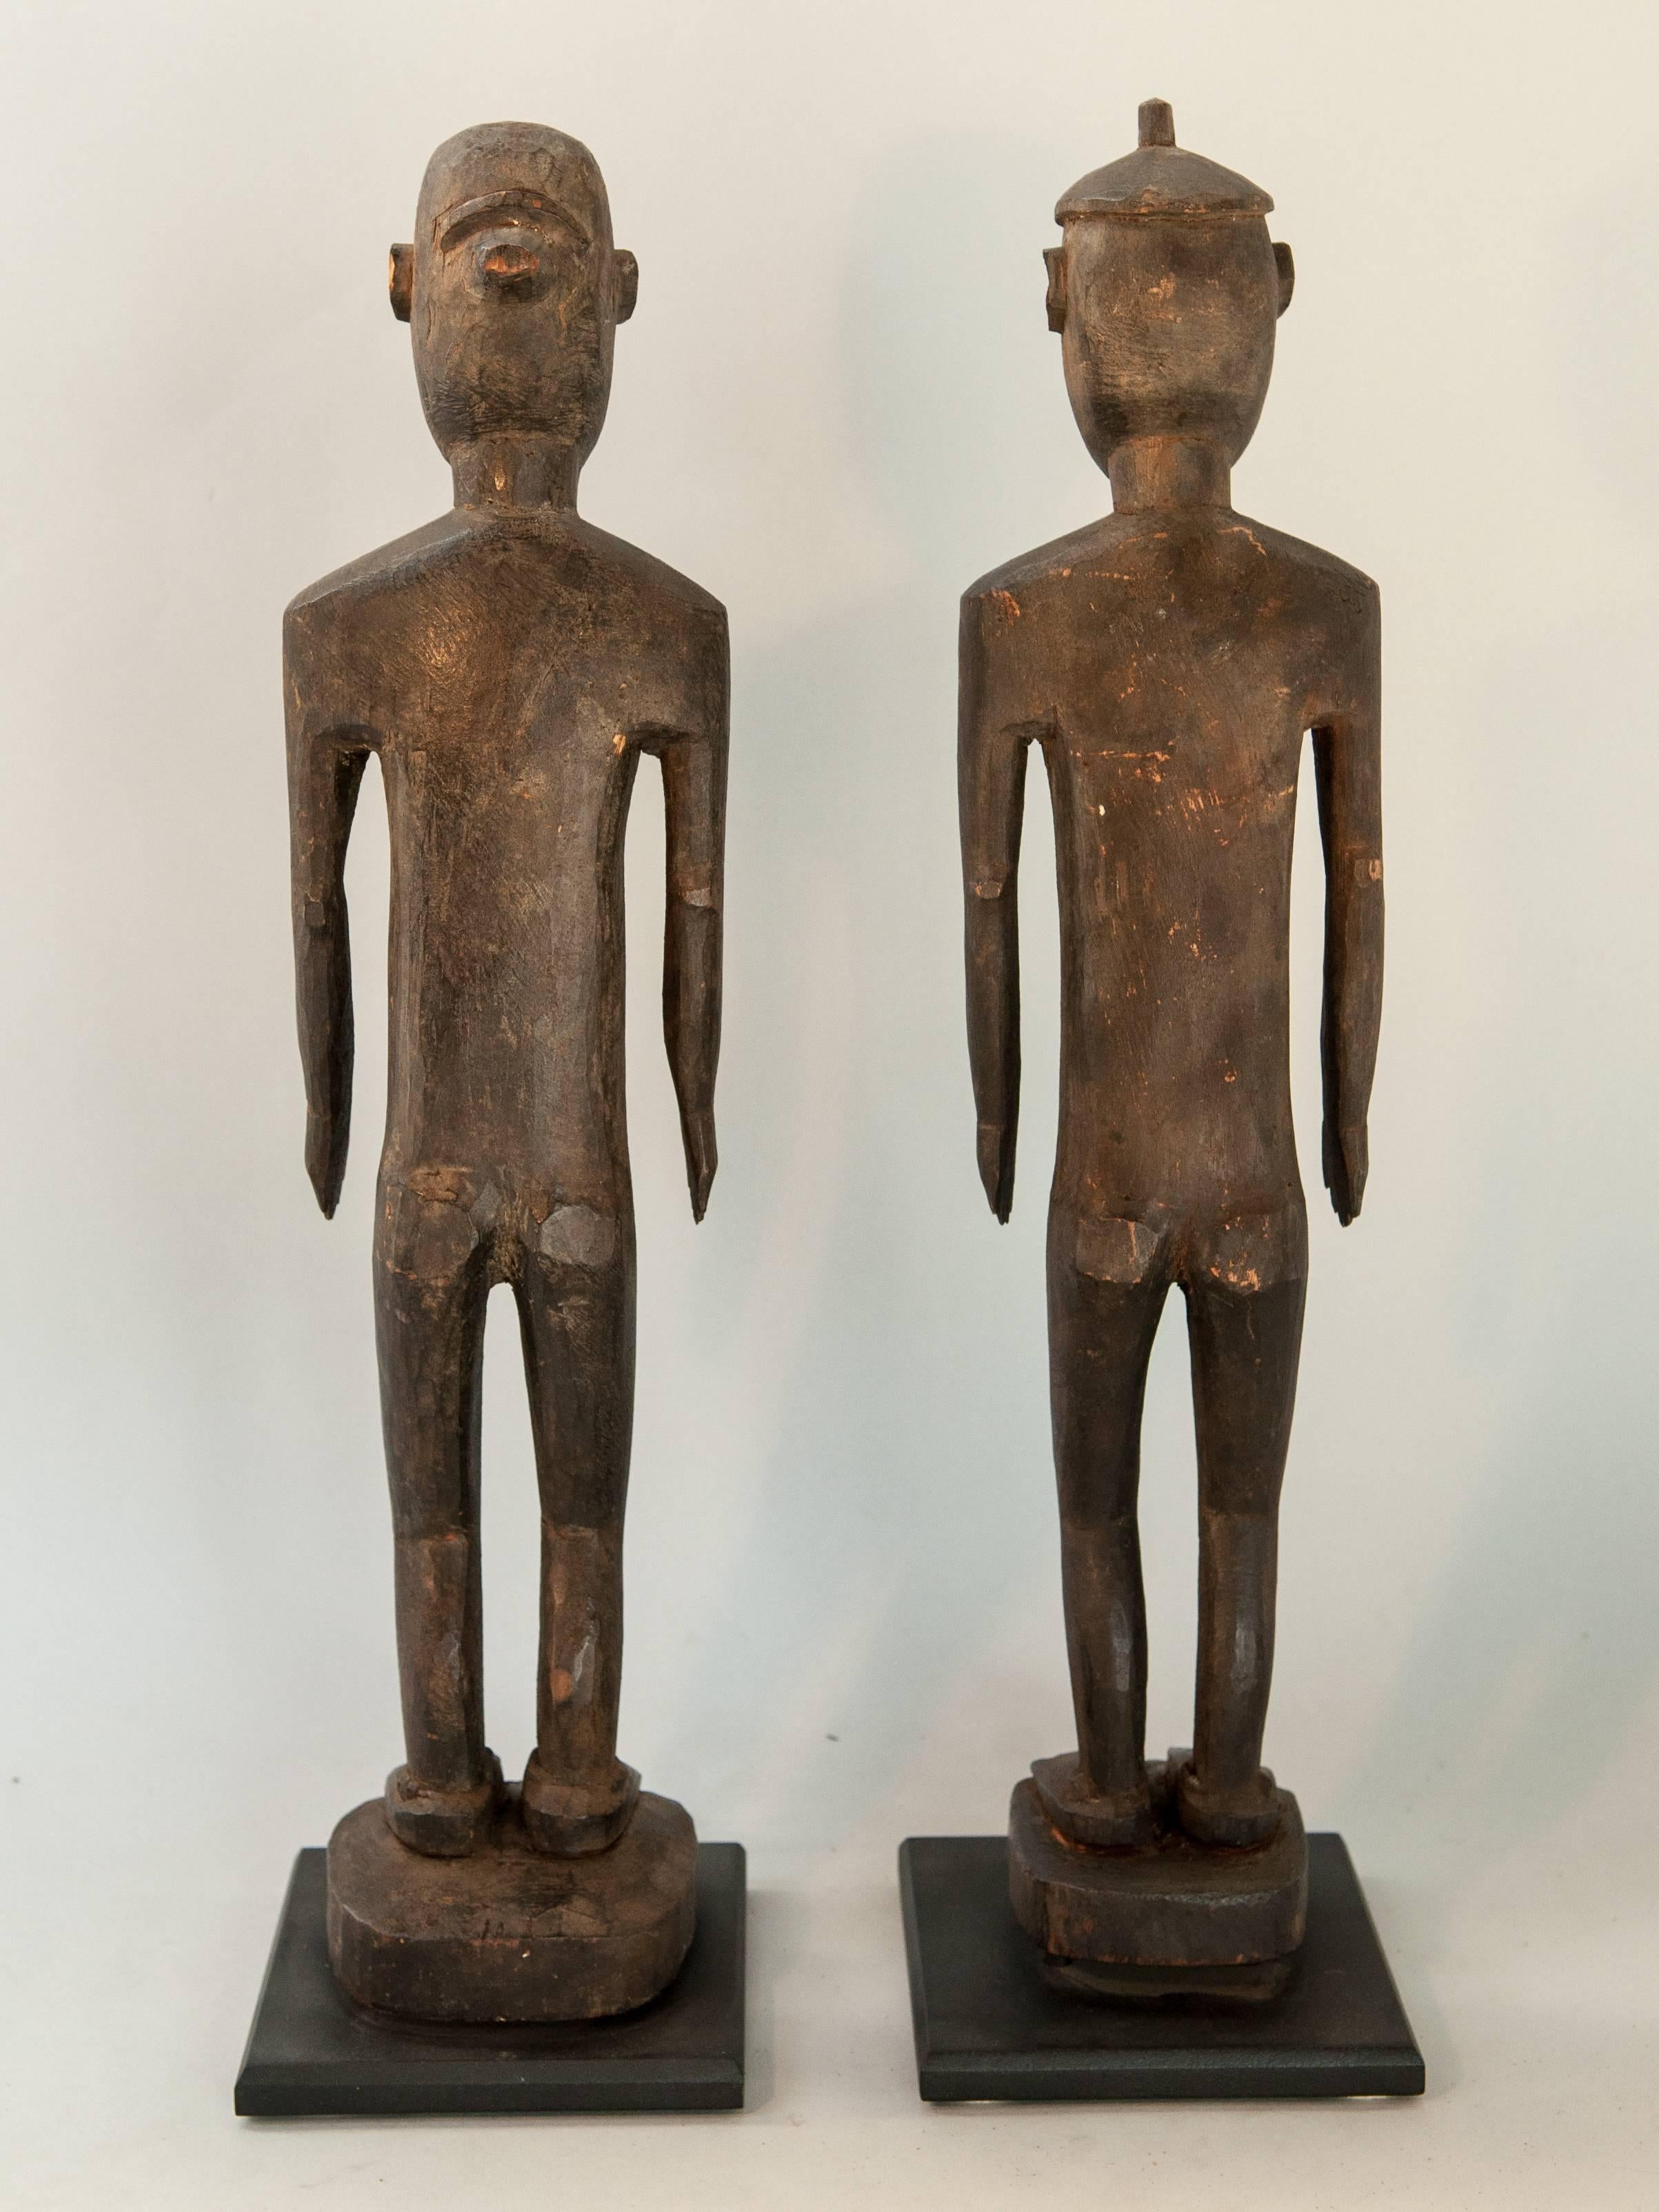 Mid-20th Century Tribal Ancestor Ana Deo Statues Lio-Ende, Central Flores. Mid-Late 20th Century